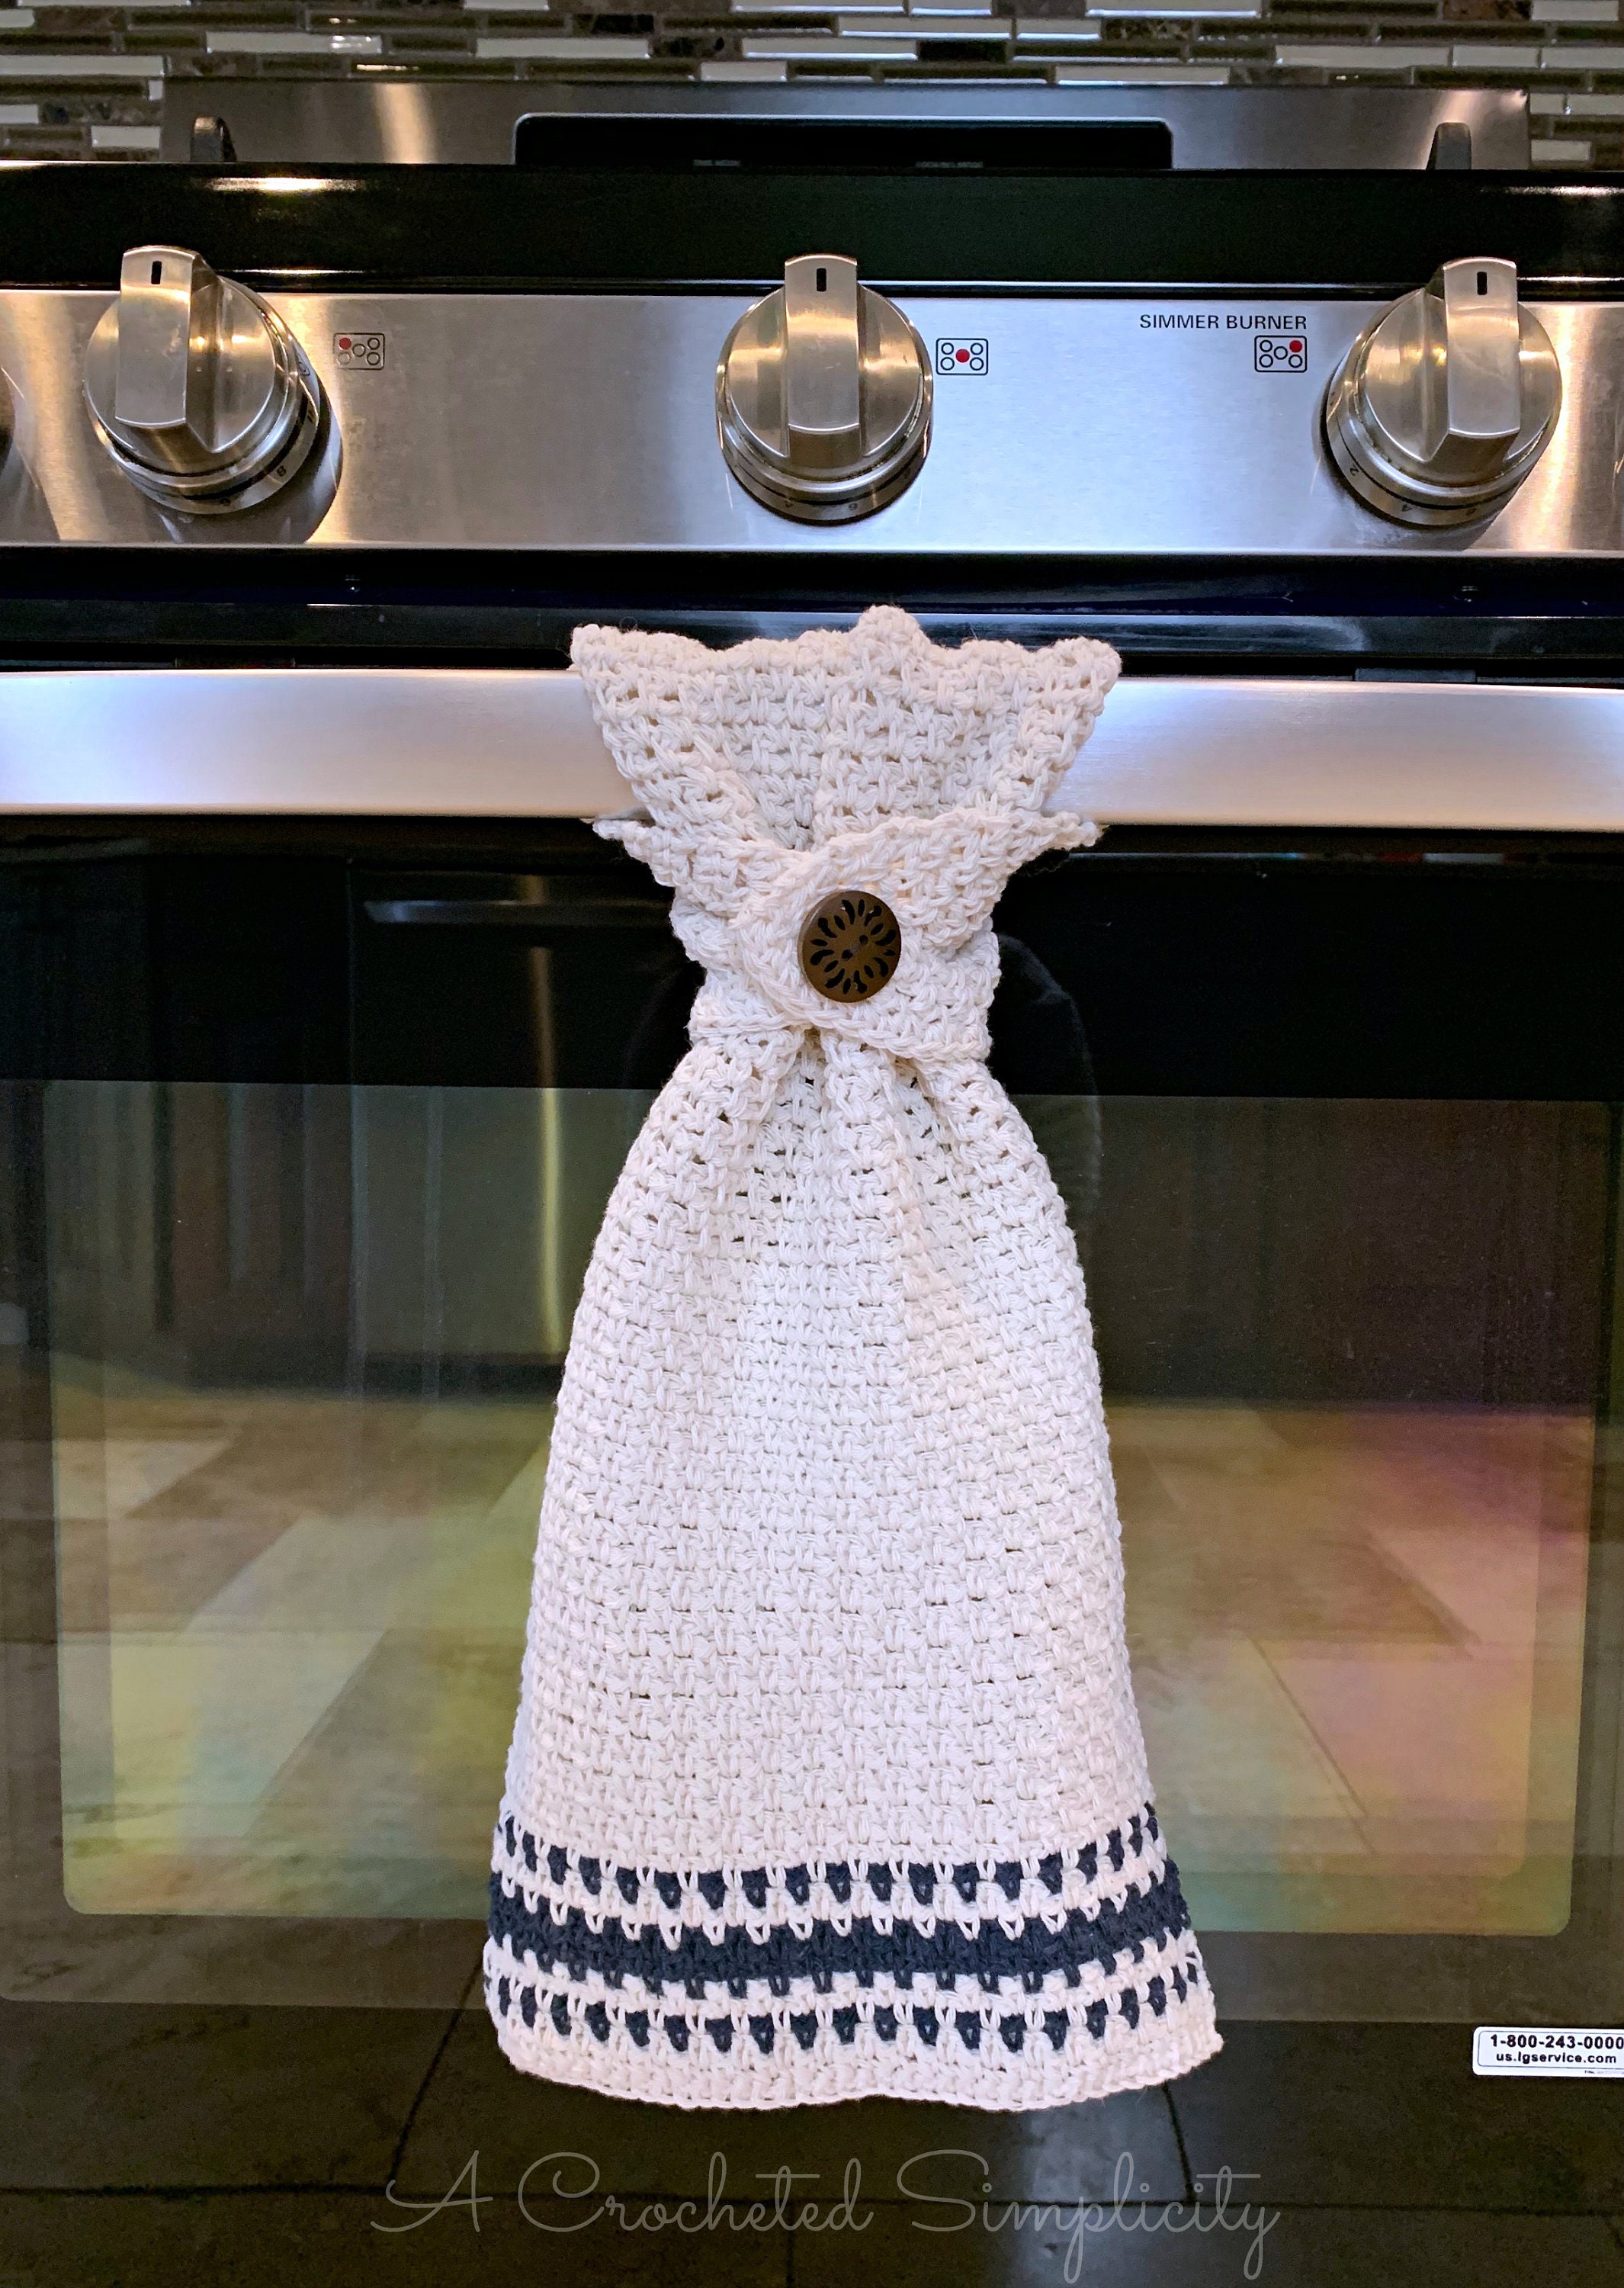 WHITE Yarn Crochet Top DOG AND COOKIES Print Cotton Kitchen Towel